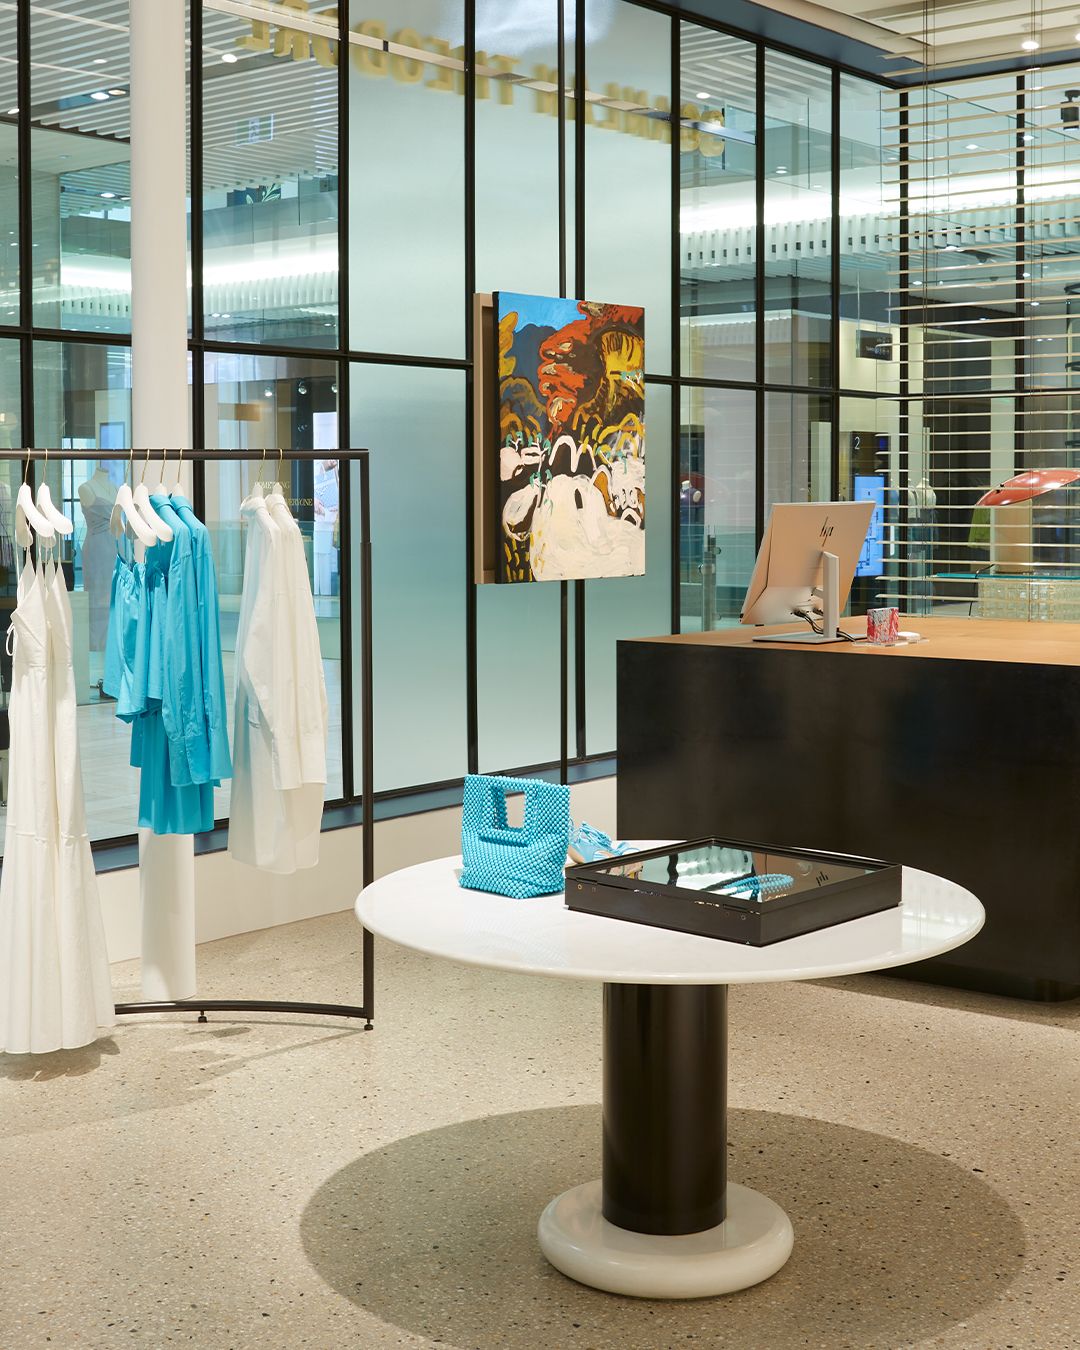 Interior of women's fashion boutique with turquoise and white clothing, a counter and abstract painting